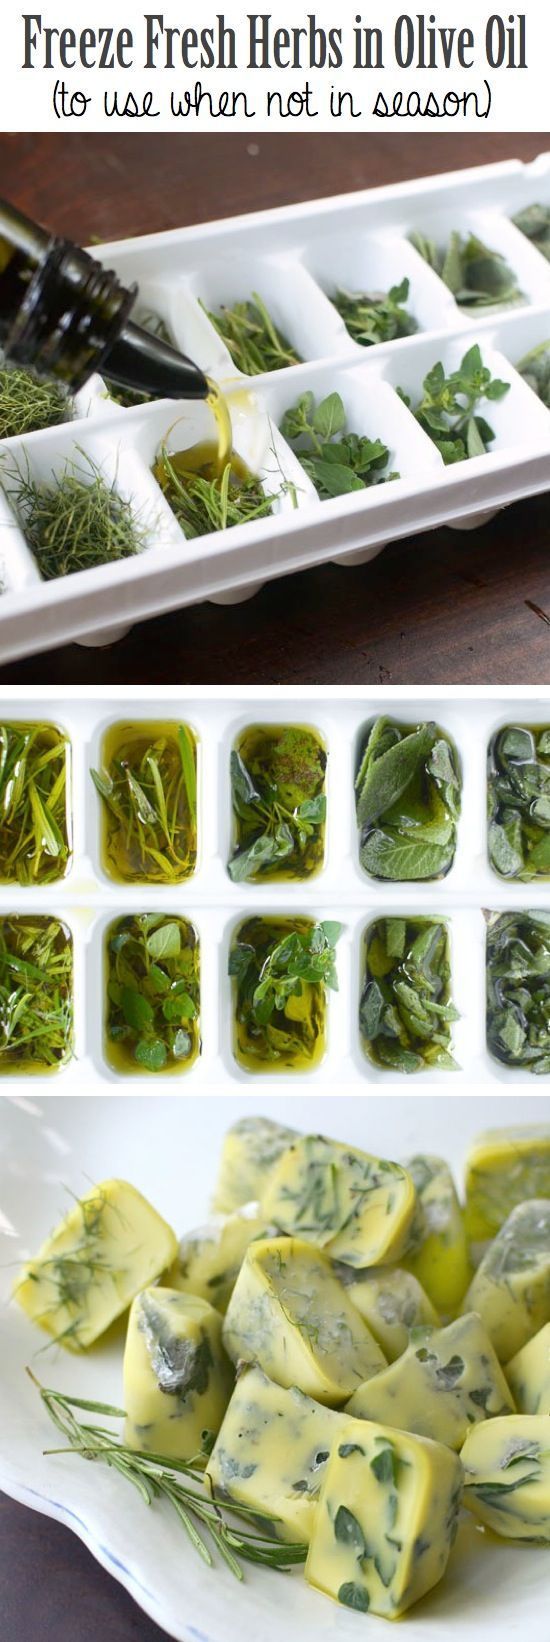 Freeze fresh herbs in olive oil! Now you can easily add the cubes to pasta or po